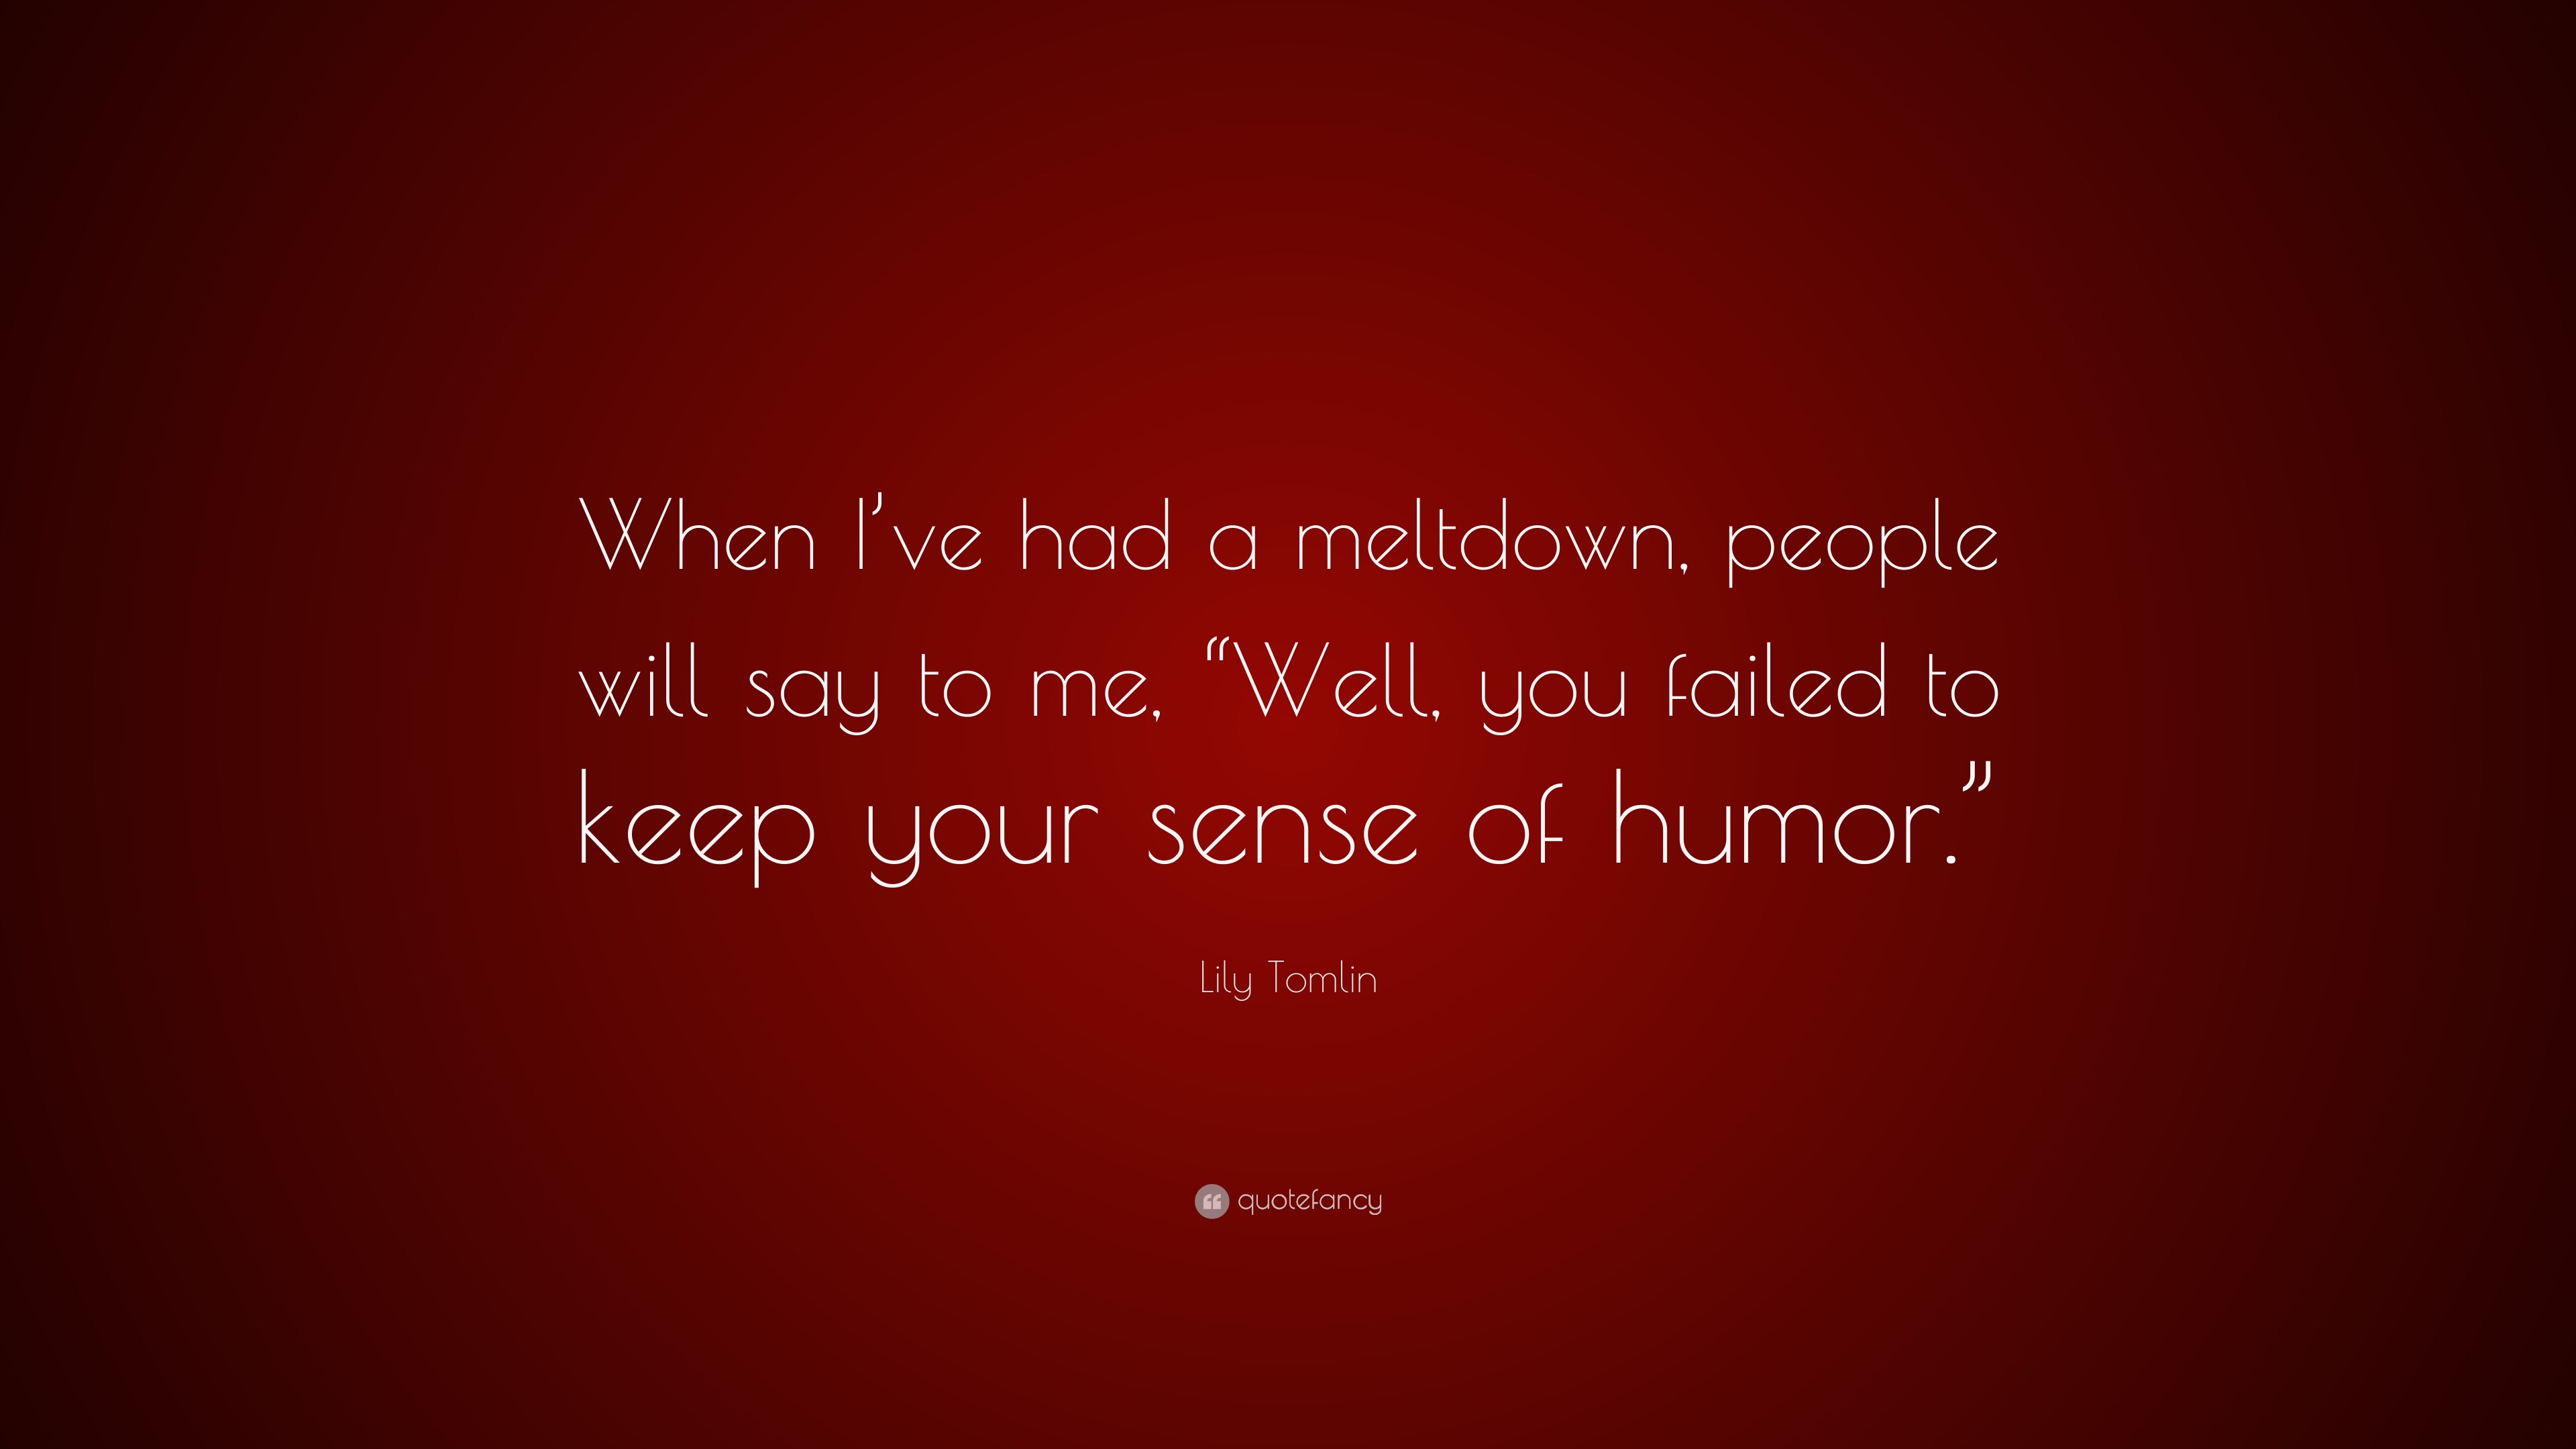 Lily Tomlin Quote: “When I’ve had a meltdown, people will say to me ...